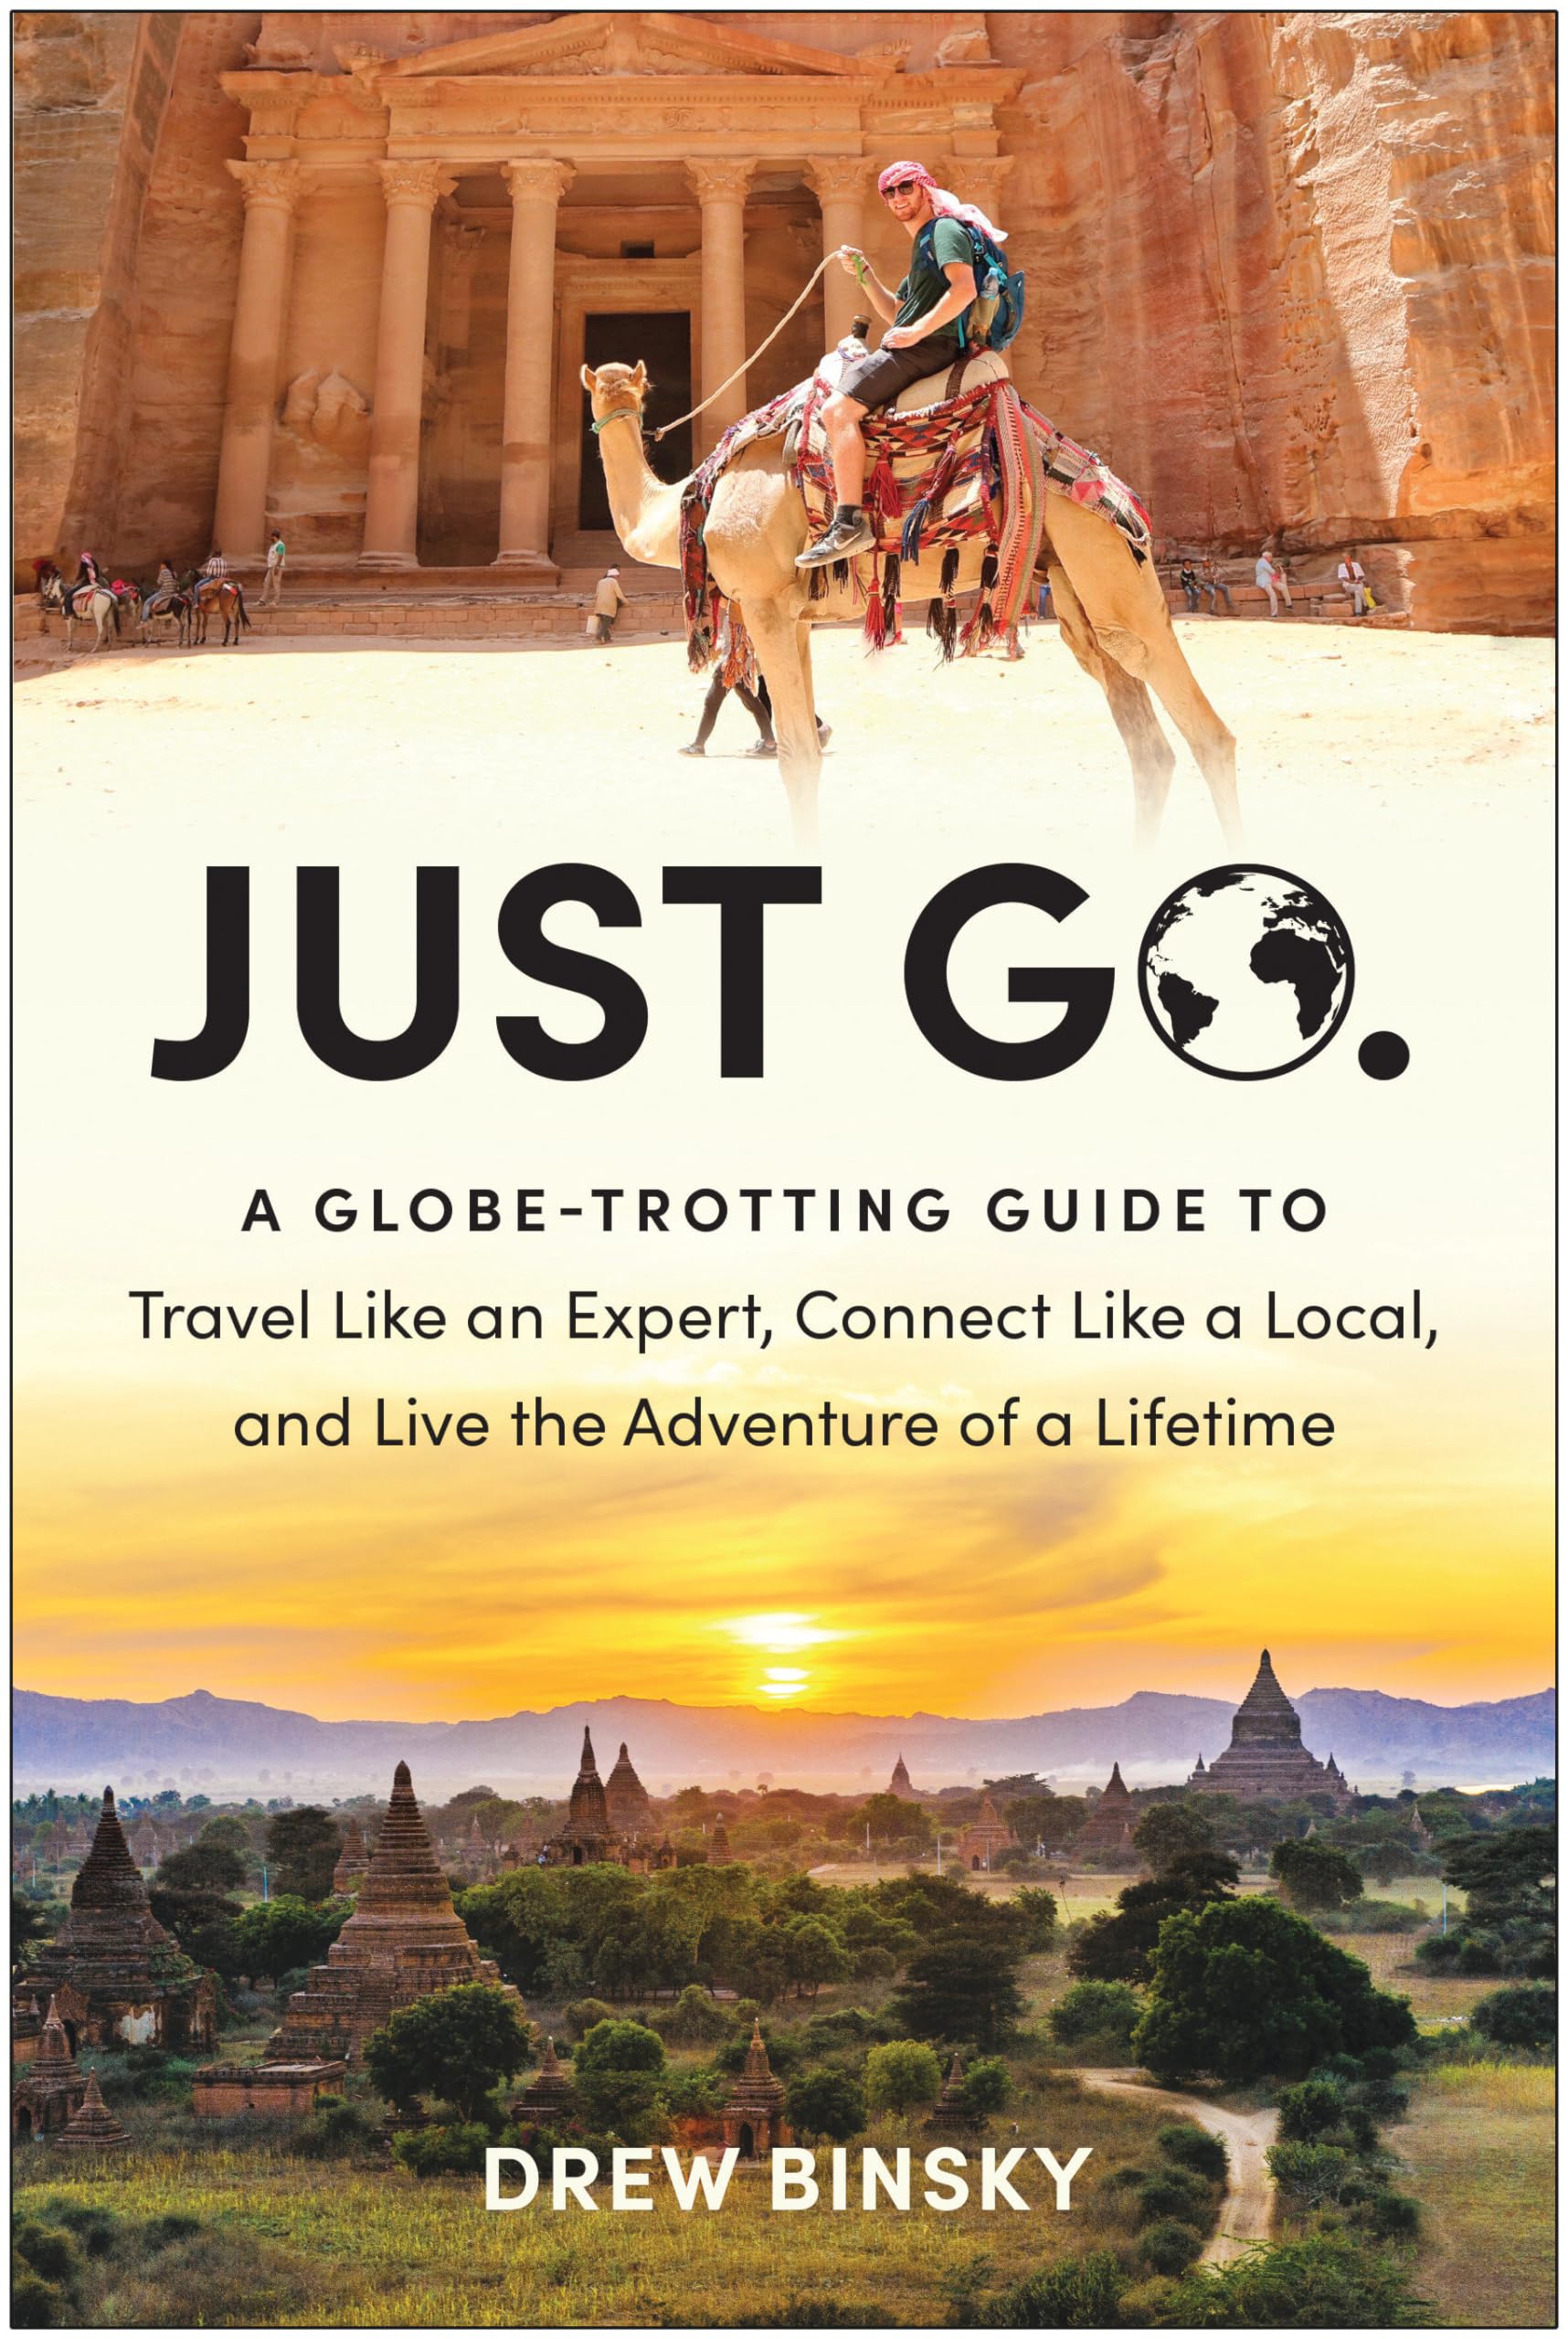 Just Go: A Globe-Trotting Guide to Travel Like an Expert, Connect Like a Local, and Live the Adventure of a Lifetime by Binsky, Drew